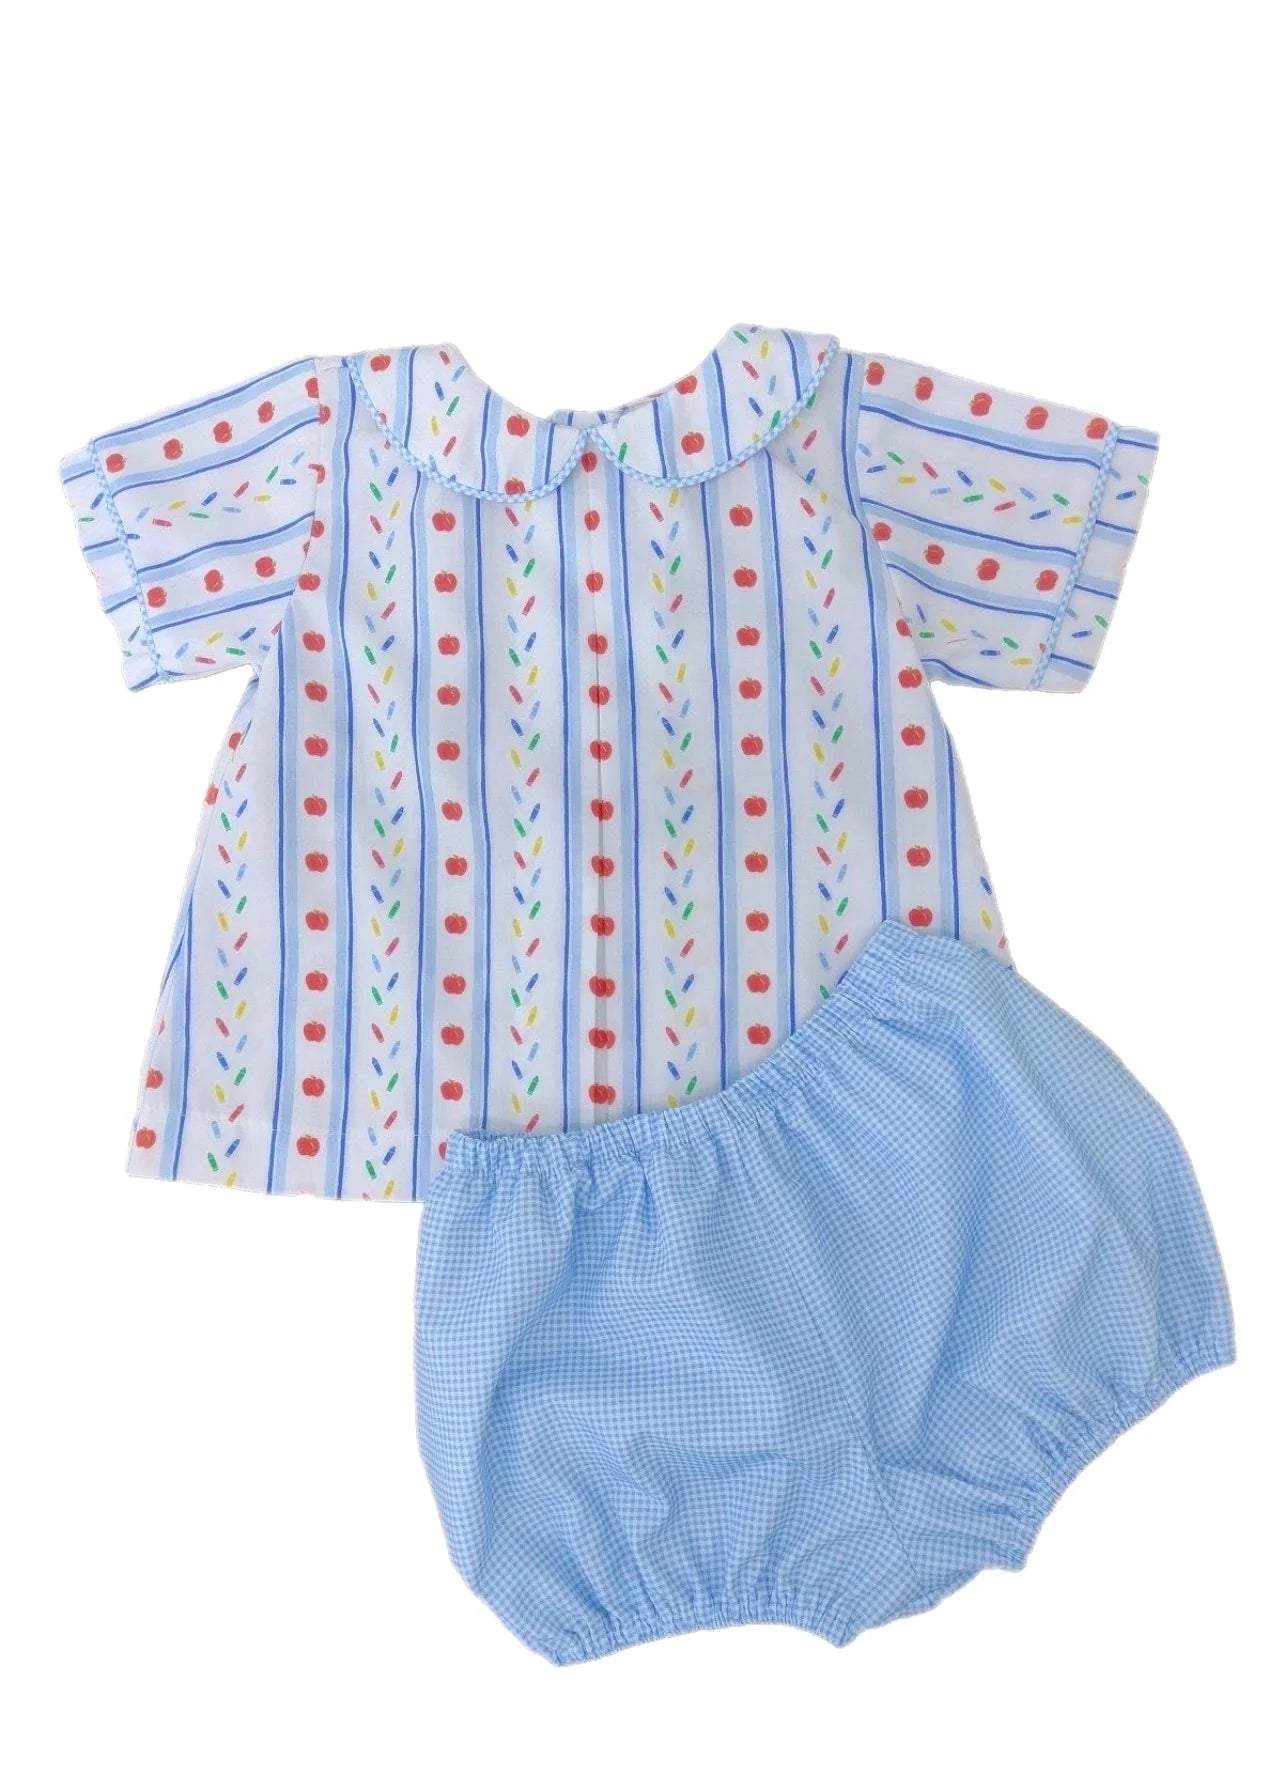 James and Lottie Rory Diaper Set - Back to School